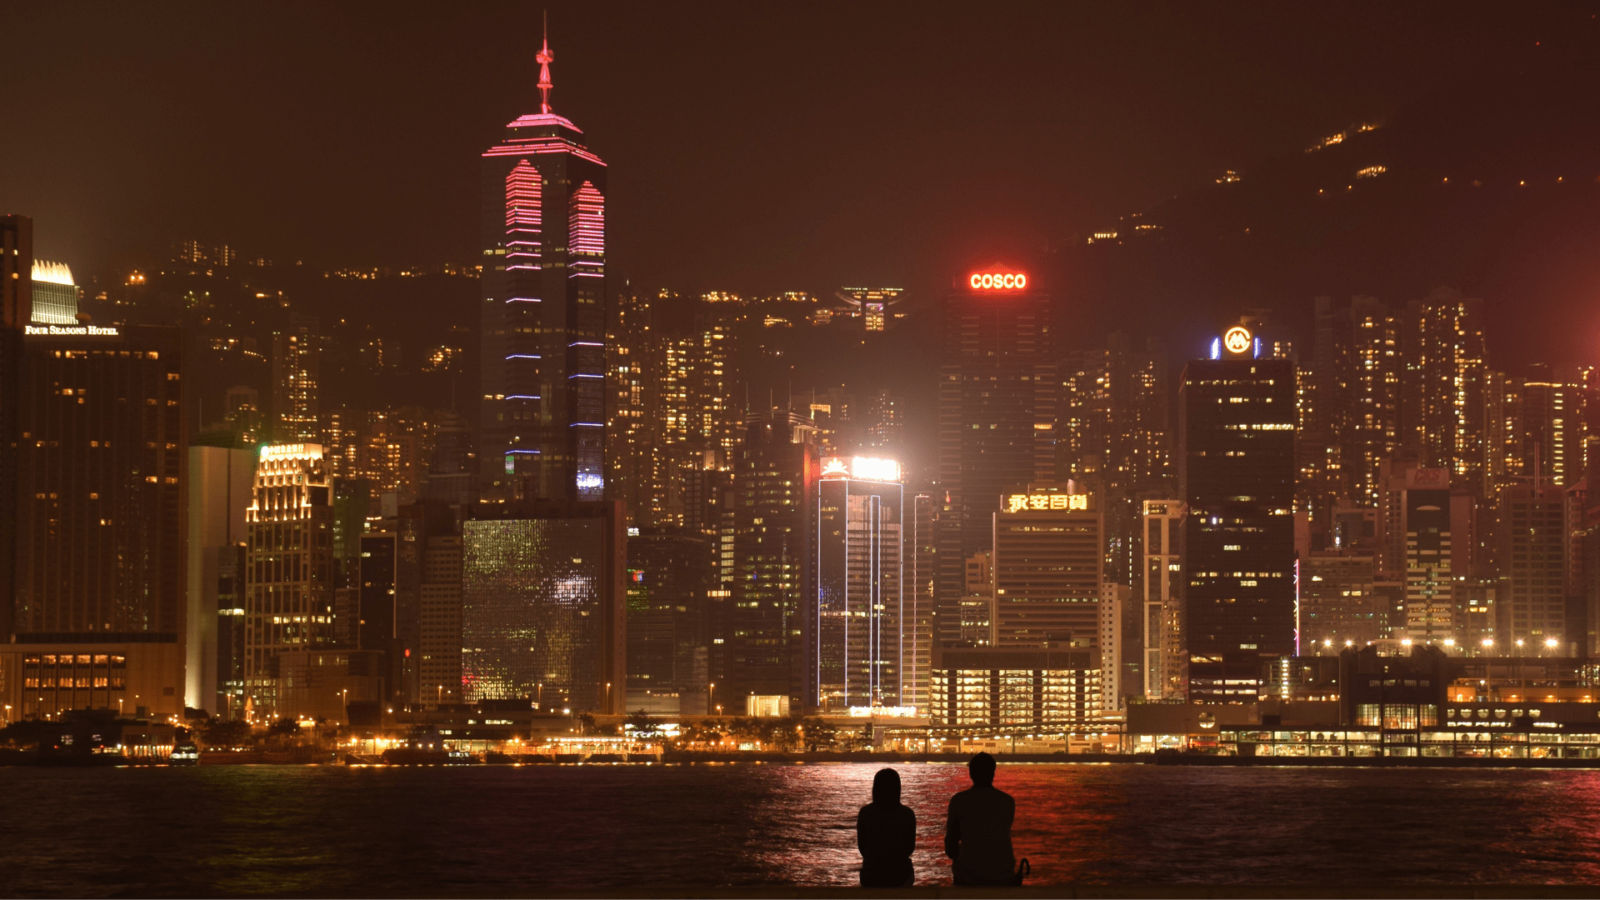 Three’s a crowd! 5 socially distant activities perfect for pairs in Hong Kong